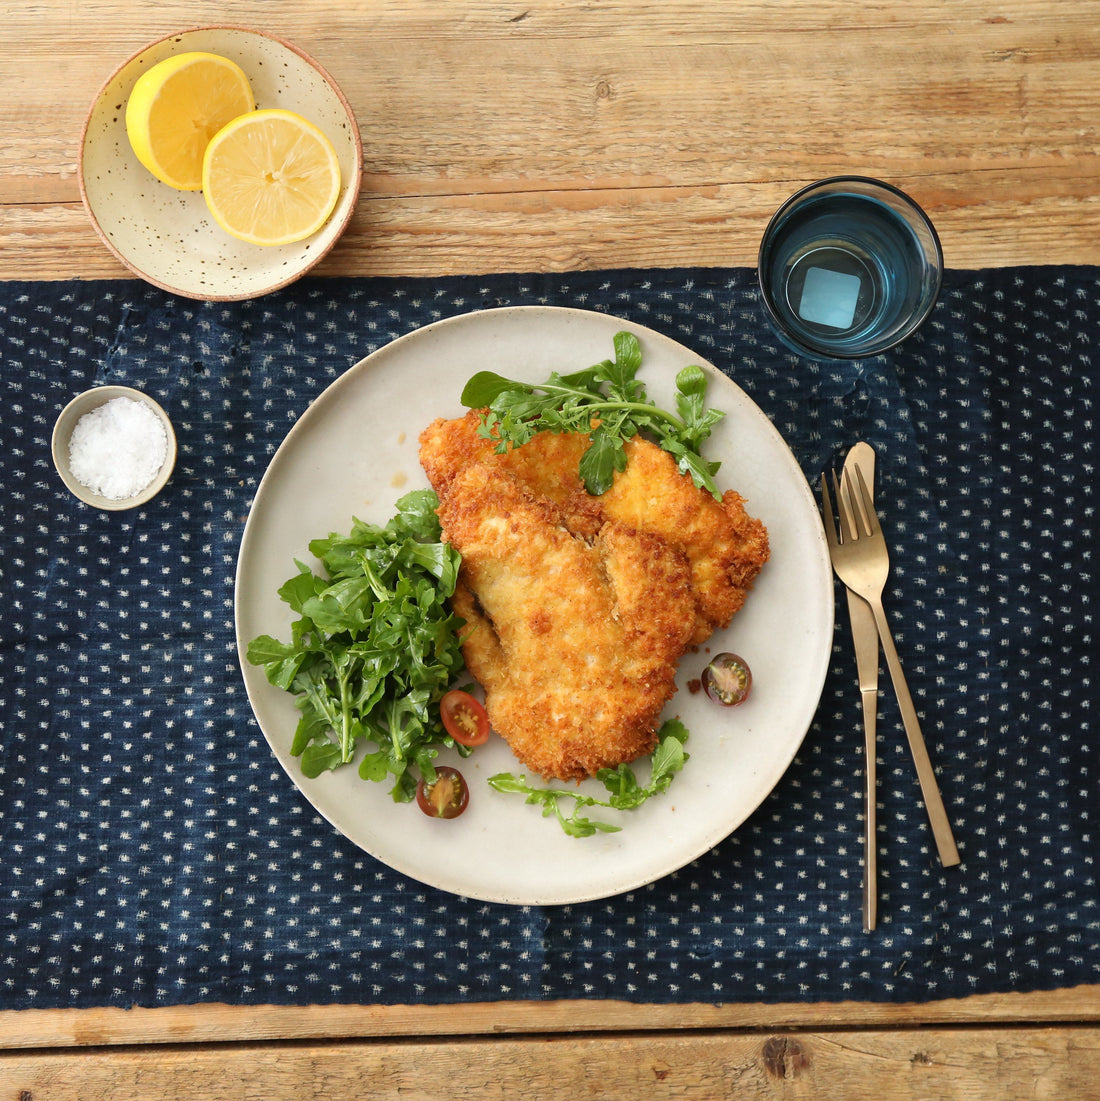 Cooked chicken schnitzel on a plate with a salad and cutlery.